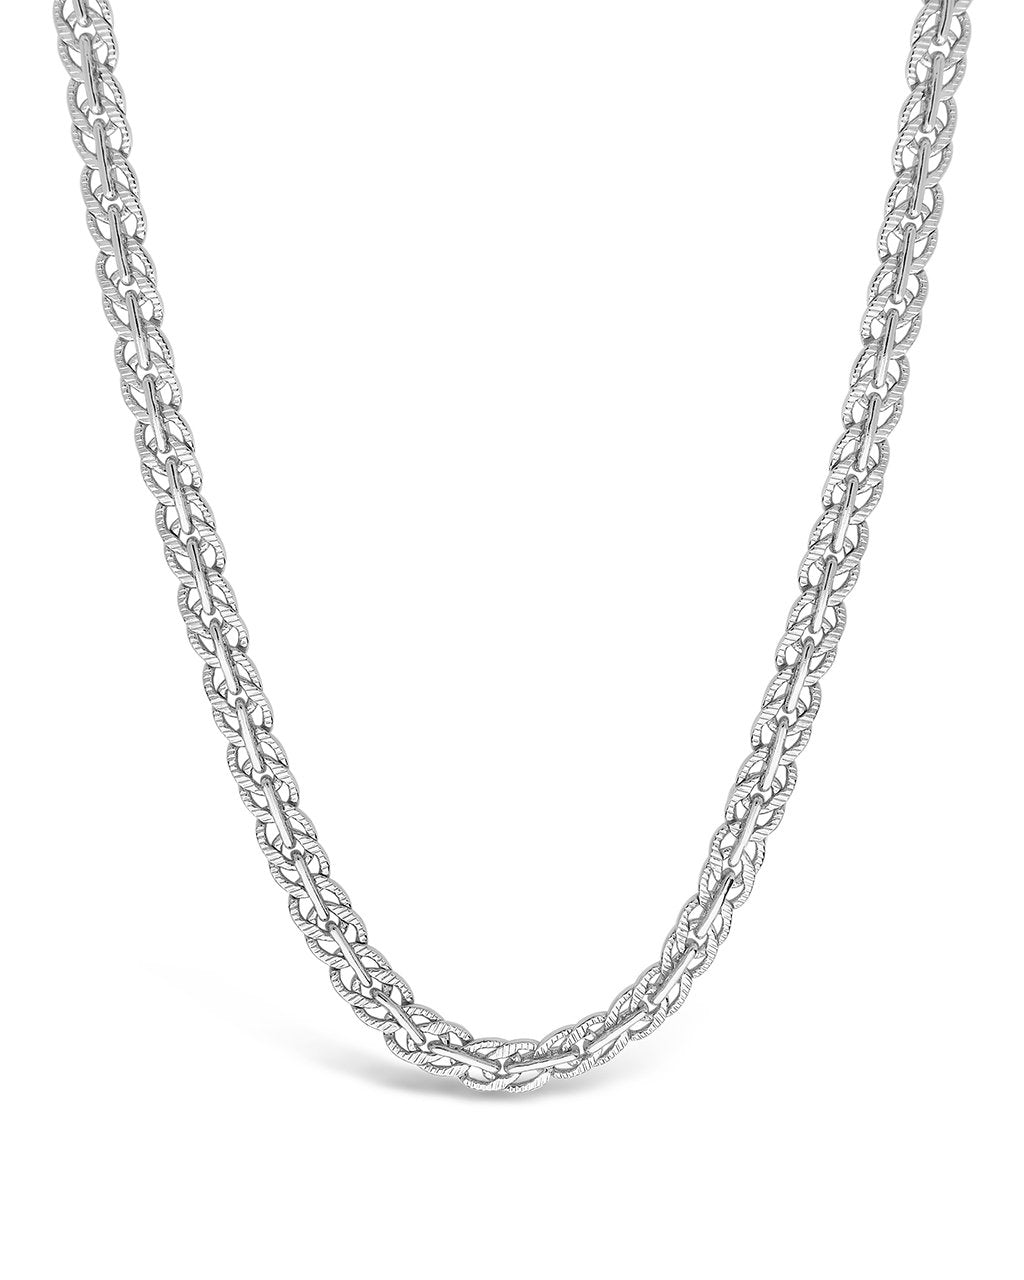 Hammered Interlocking Curb Chain Necklace Sterling Forever Silver 